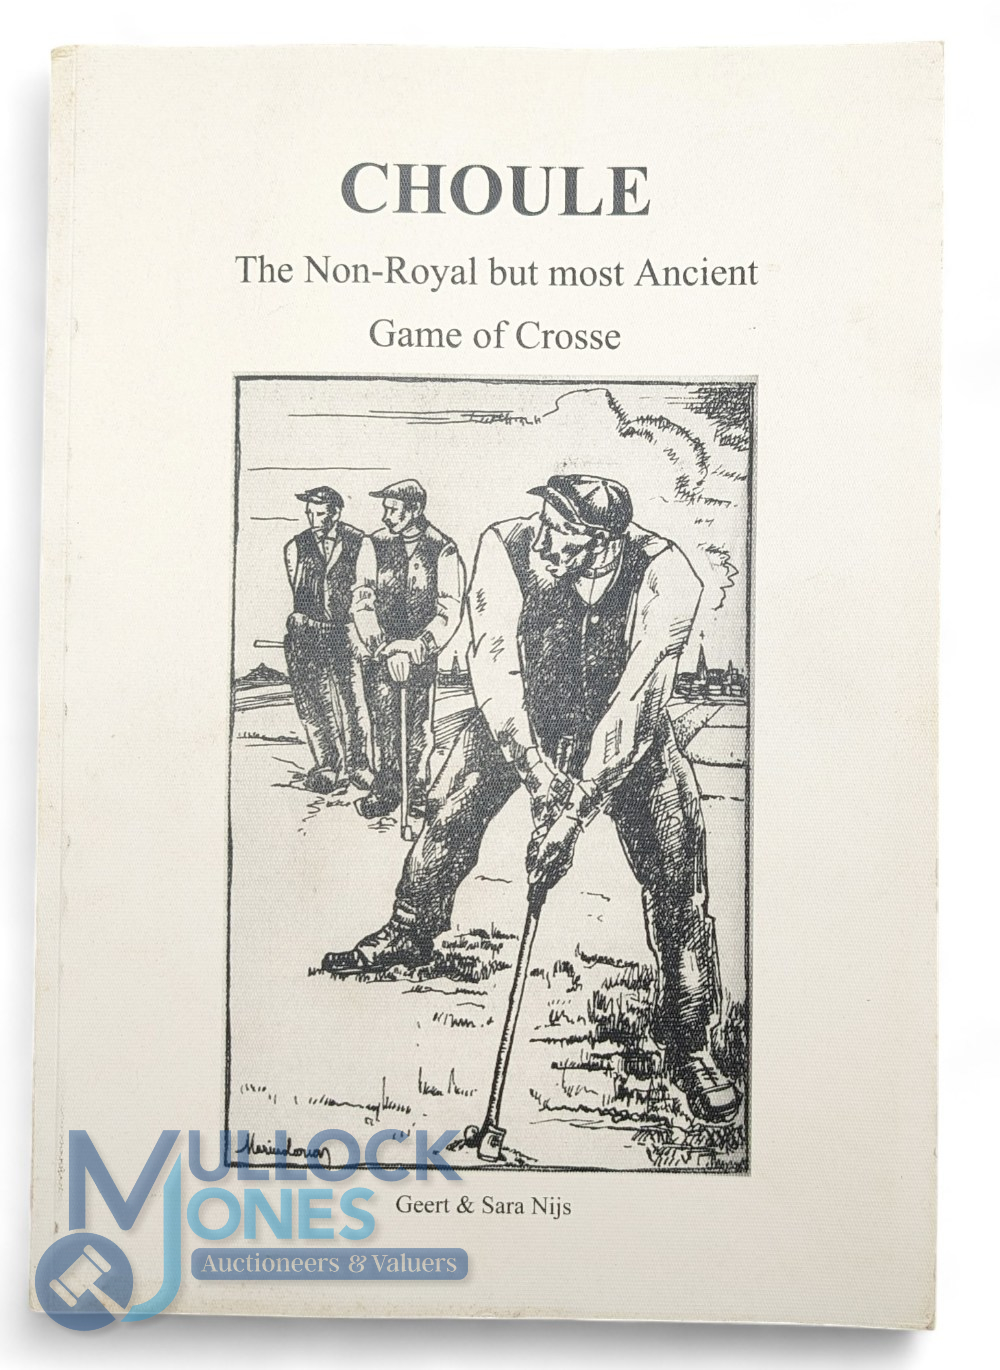 Geert & Sara Nijs - "Choule - The Non-Royal but most Ancient Game of Crosse" 1st ed 2008 in the